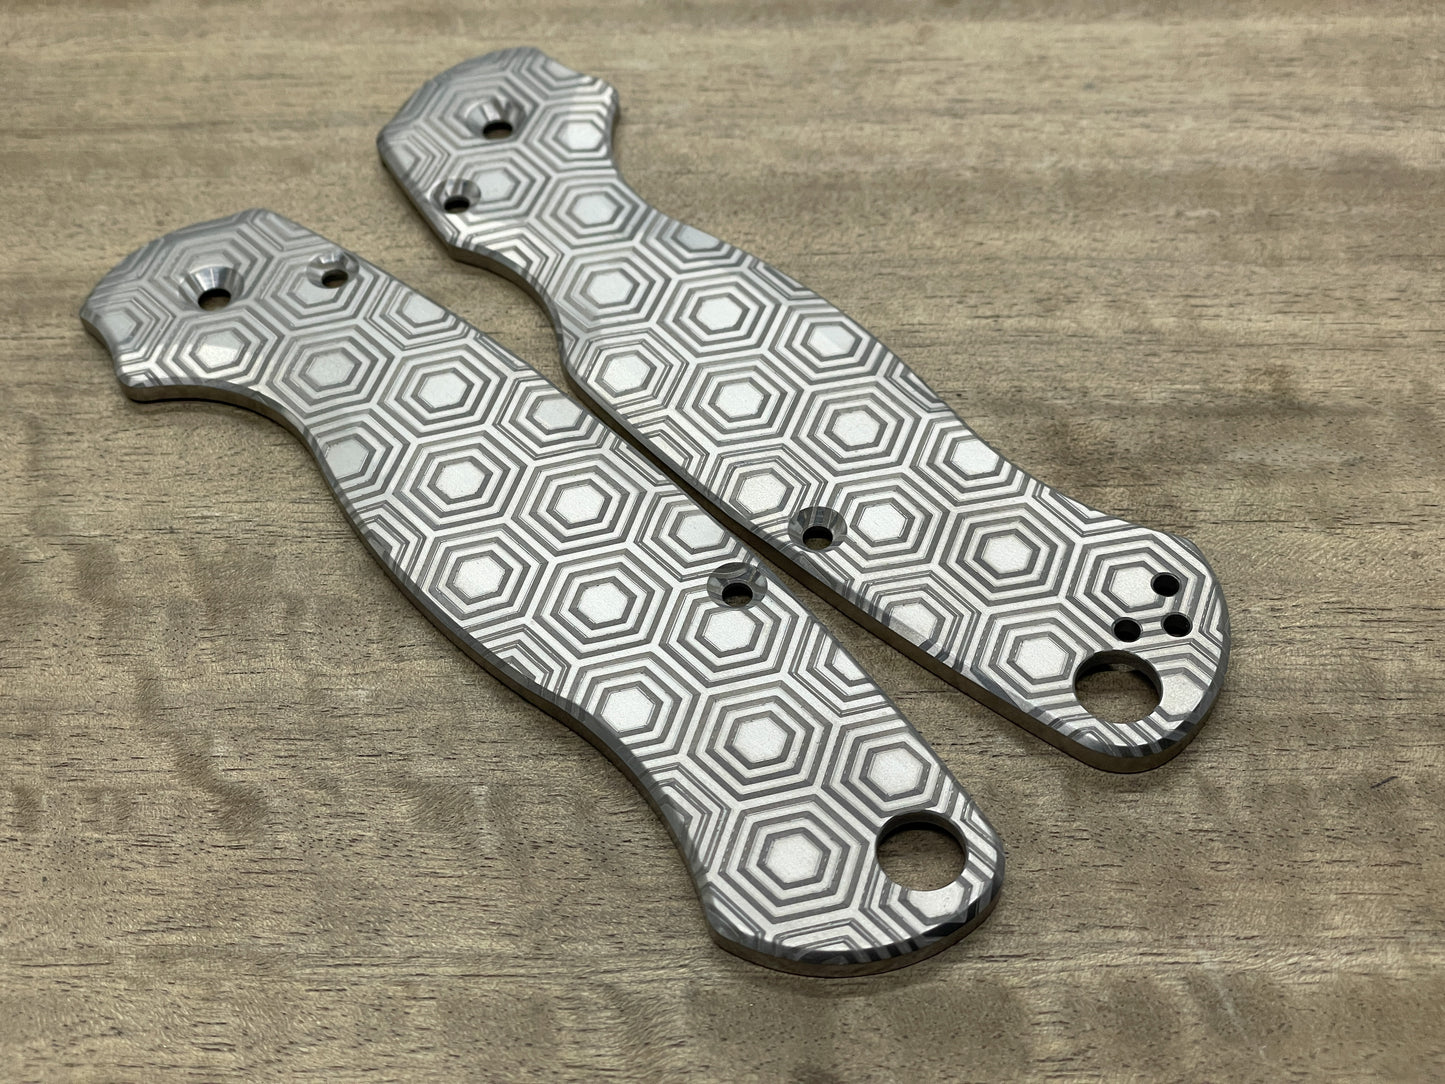 HONEYCOMB engraved Titanium scales for Spyderco Paramilitary 2 PM2